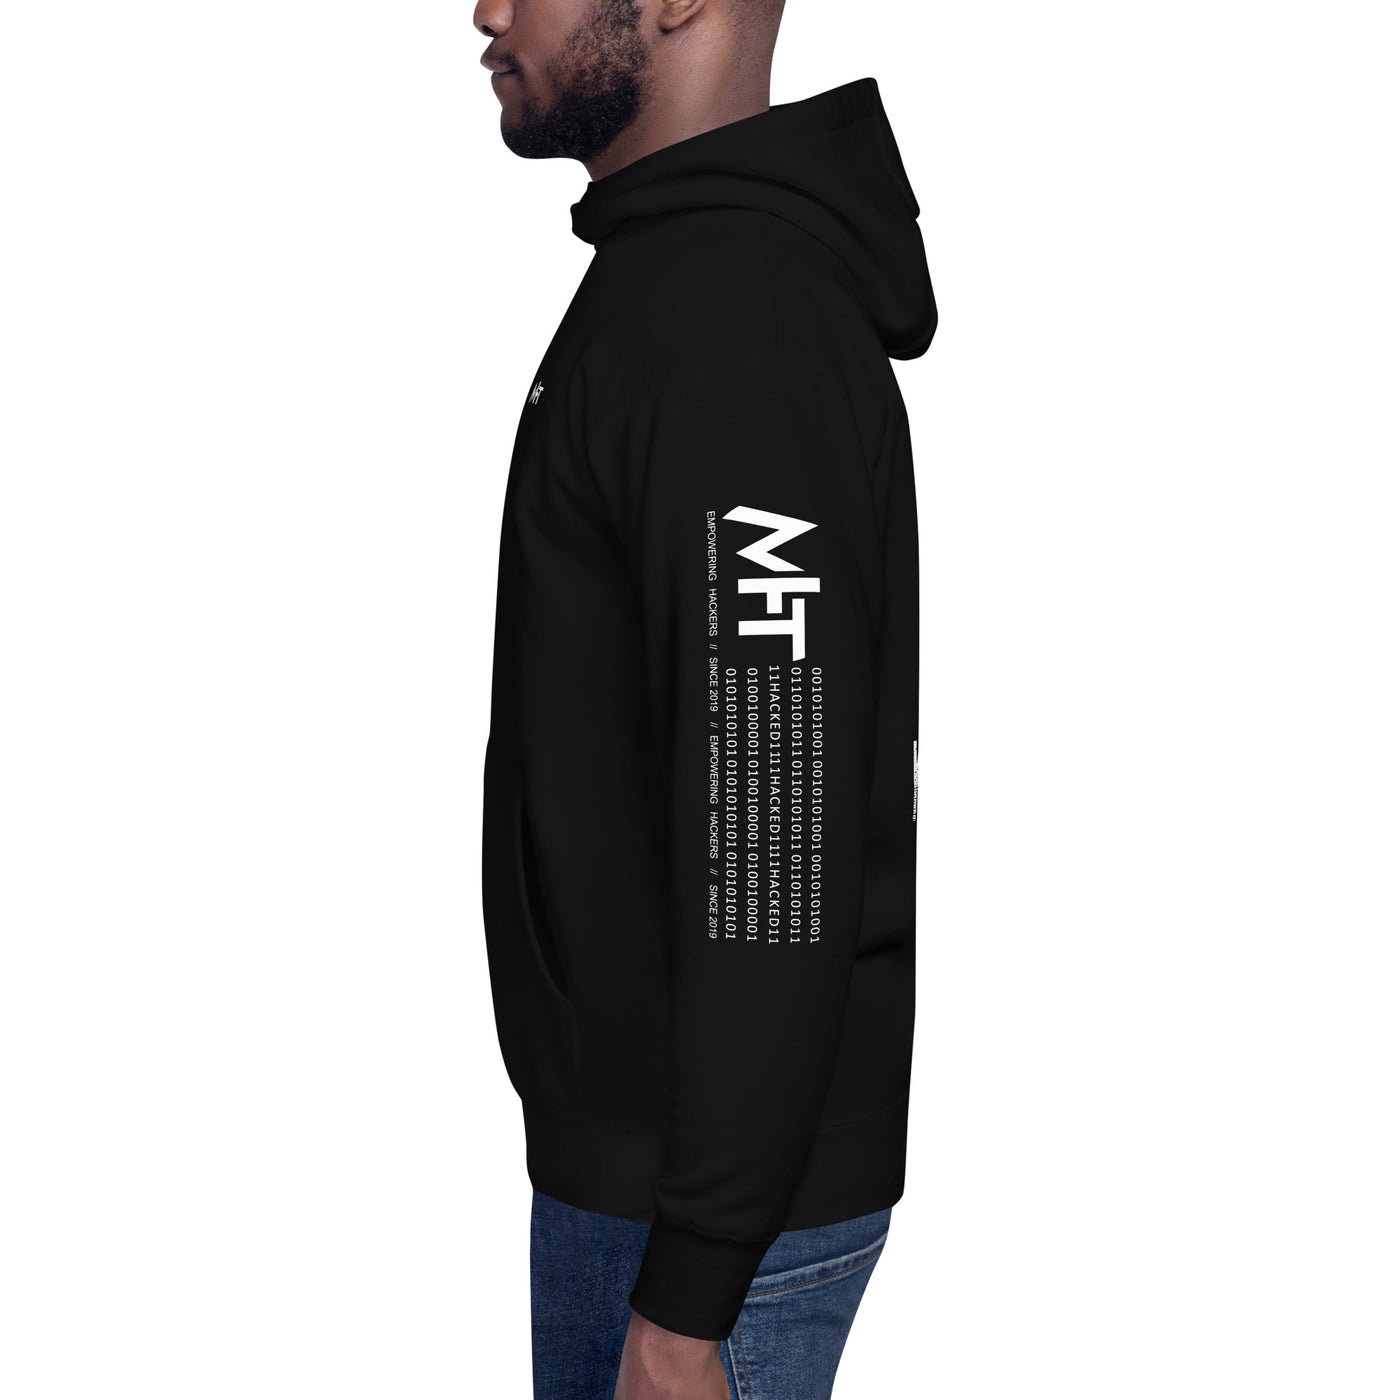 Show me the Nothing you Clicked on V2 Unisex Hoodie ( Back Print )